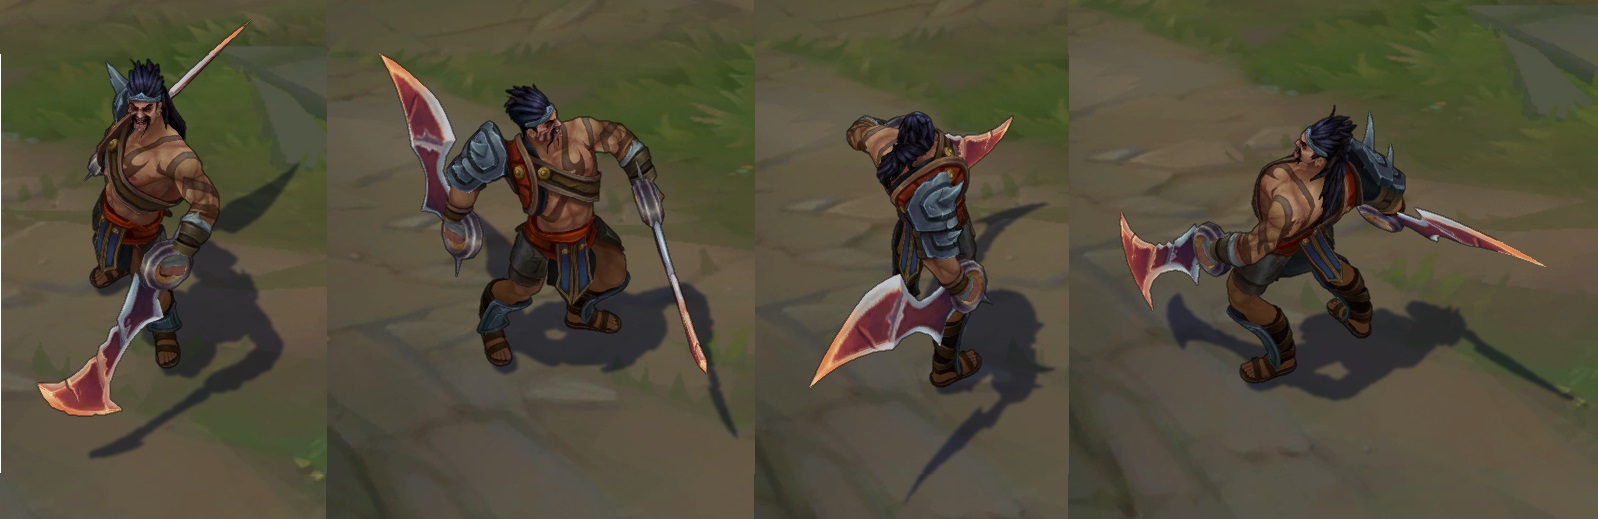 Surrender at 20: Champion and Skin Sale 1/20 - 1/23
